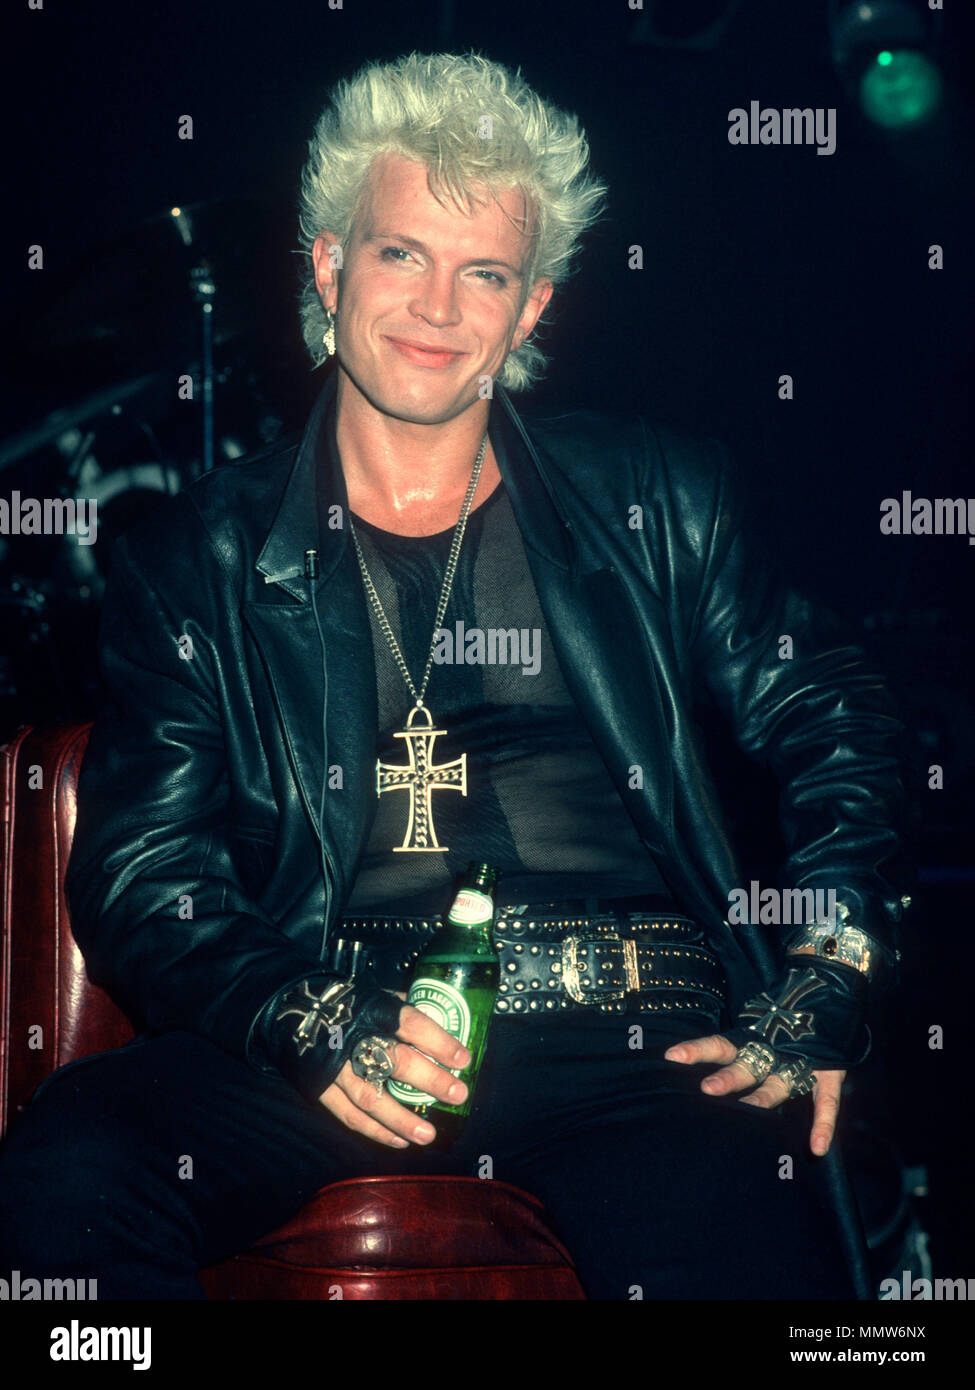 LOS ANGELES, CA - JULY 09: Singer Billy Idol performs in concert at Rubber Club on July 9, 1990 in Los Angeles, California. Photo by Barry King/Alamy Stock Photo Stock Photo